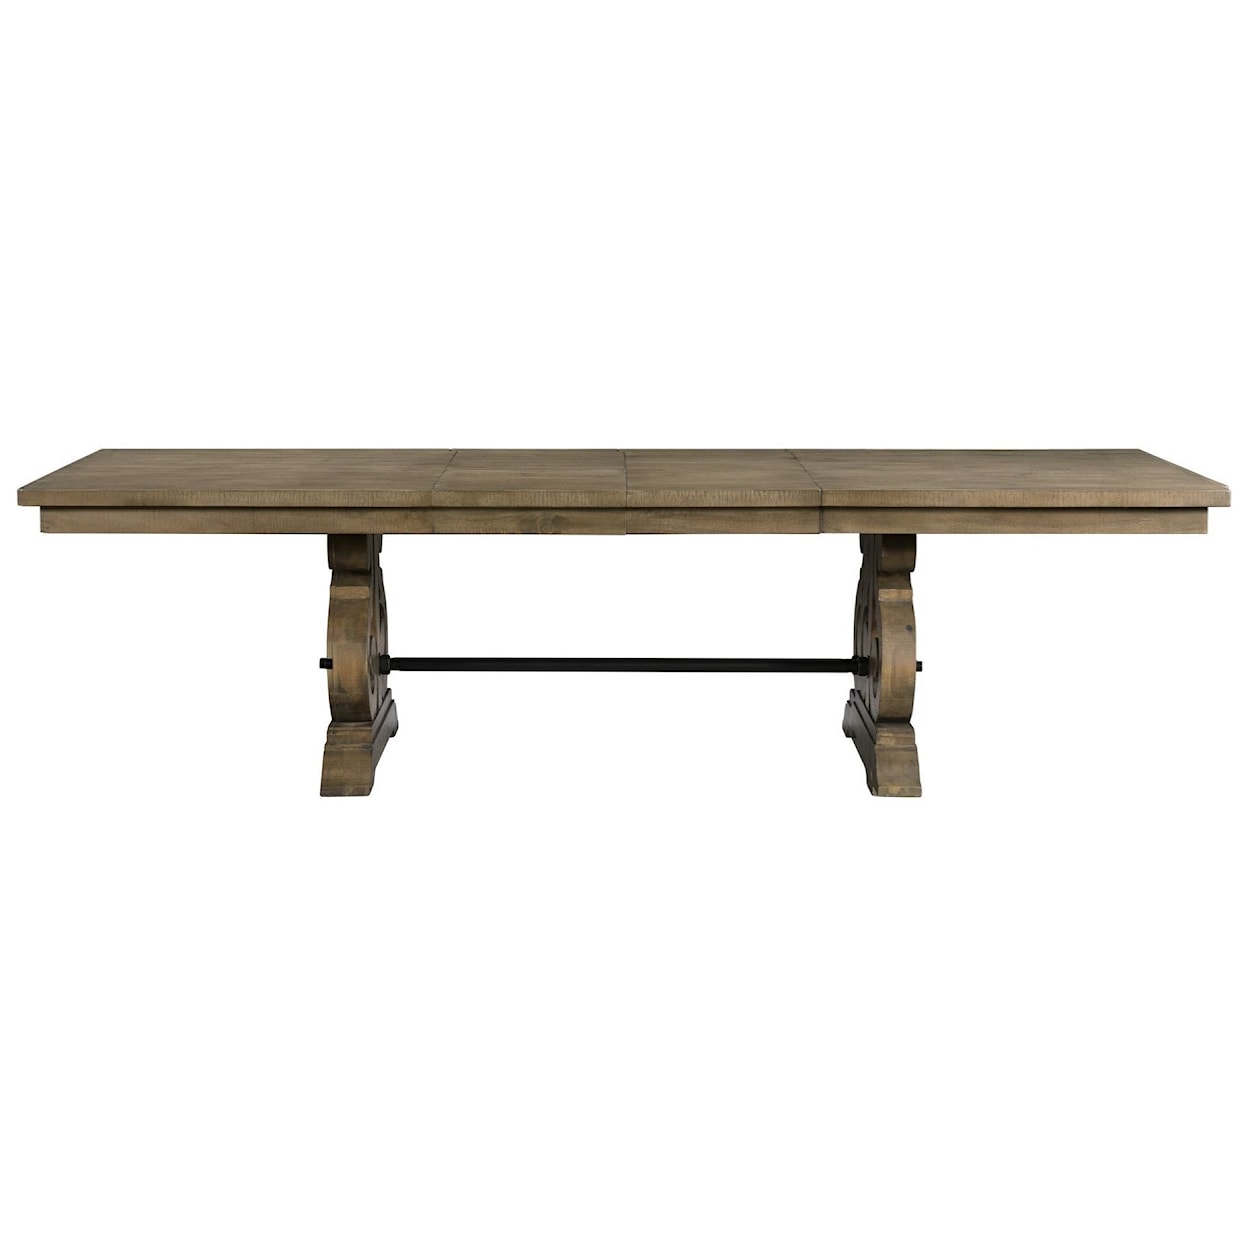 Elements Stone Dining Table